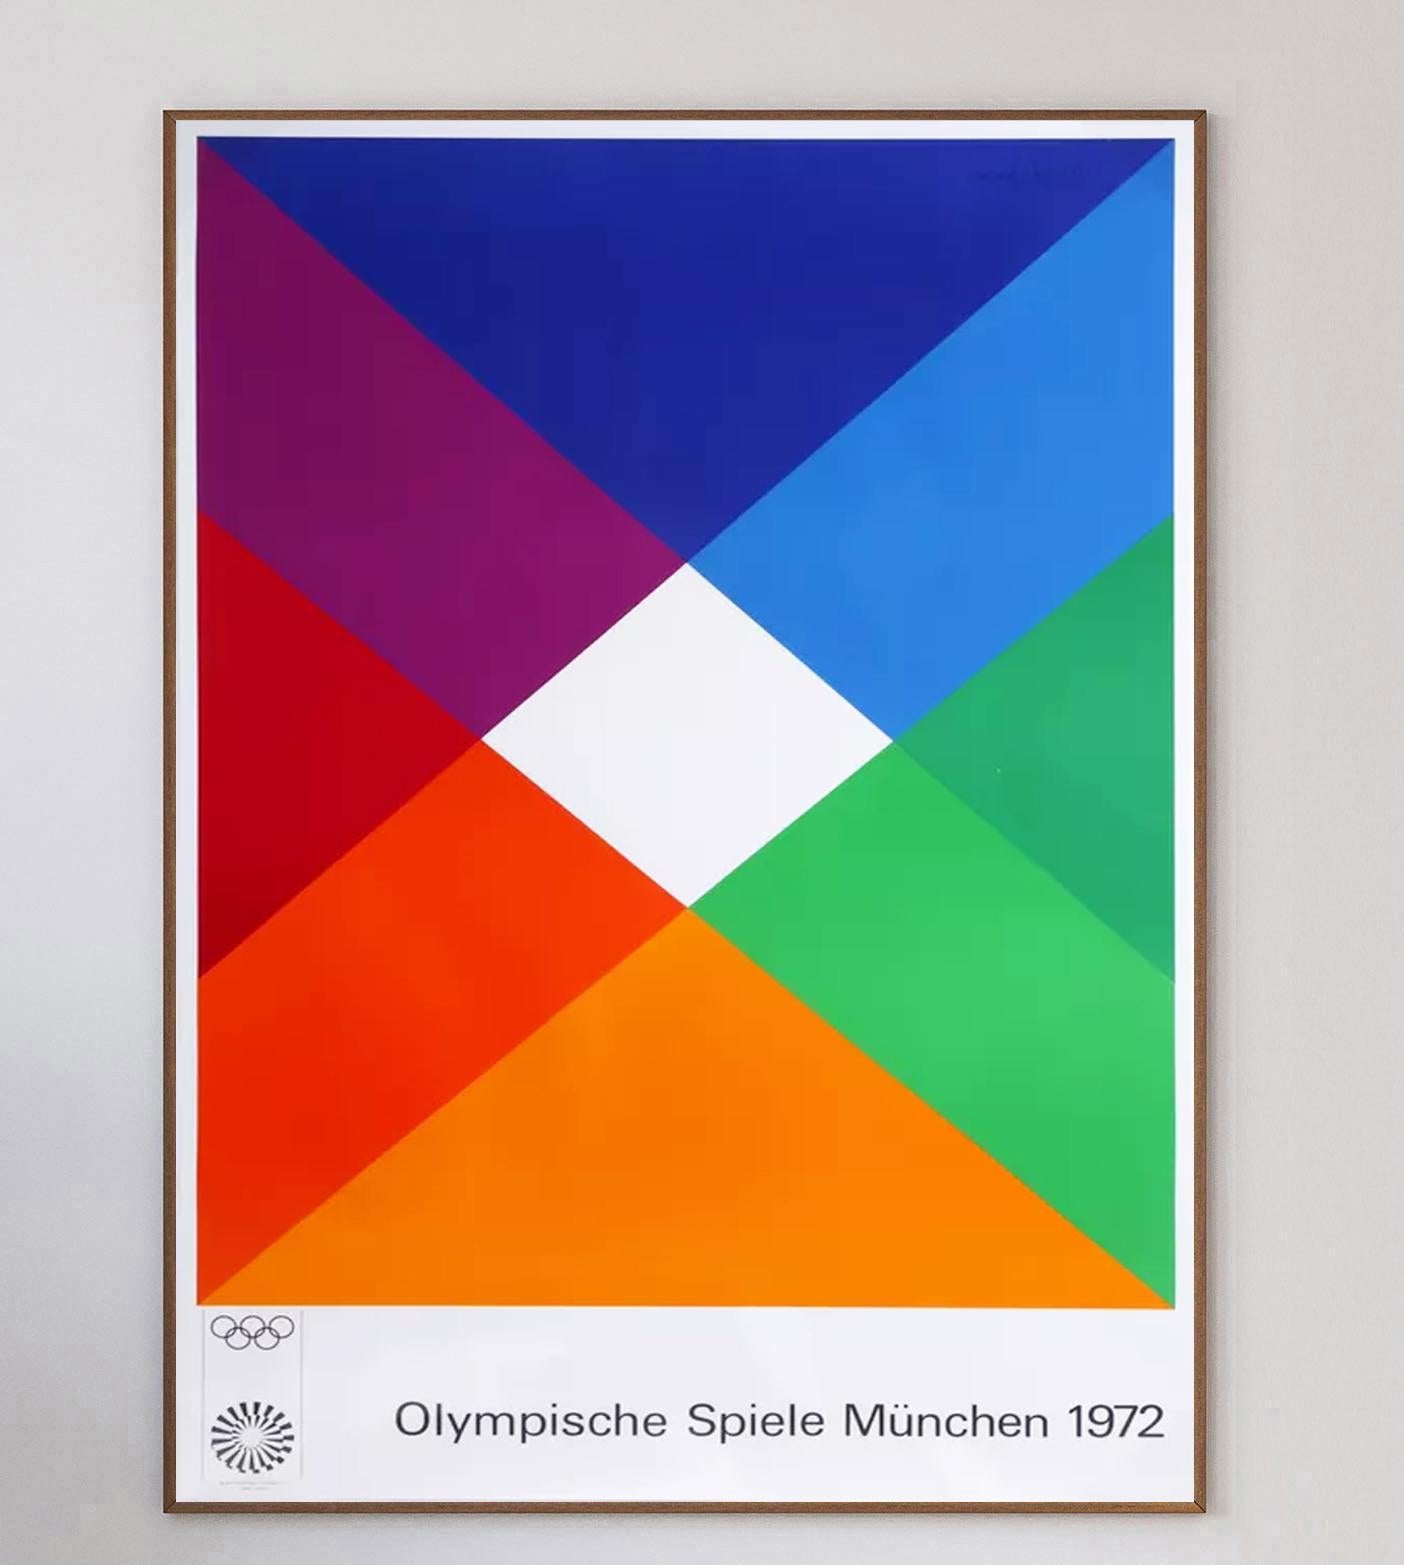 Swiss artist & graphic designer Max Bill was one of 29 artists commissioned to produce posters for the 1972 Munich Olympic Games. In the run-up to the 1972 Games, the Organising Committee decided to commission a series of Artist Posters to